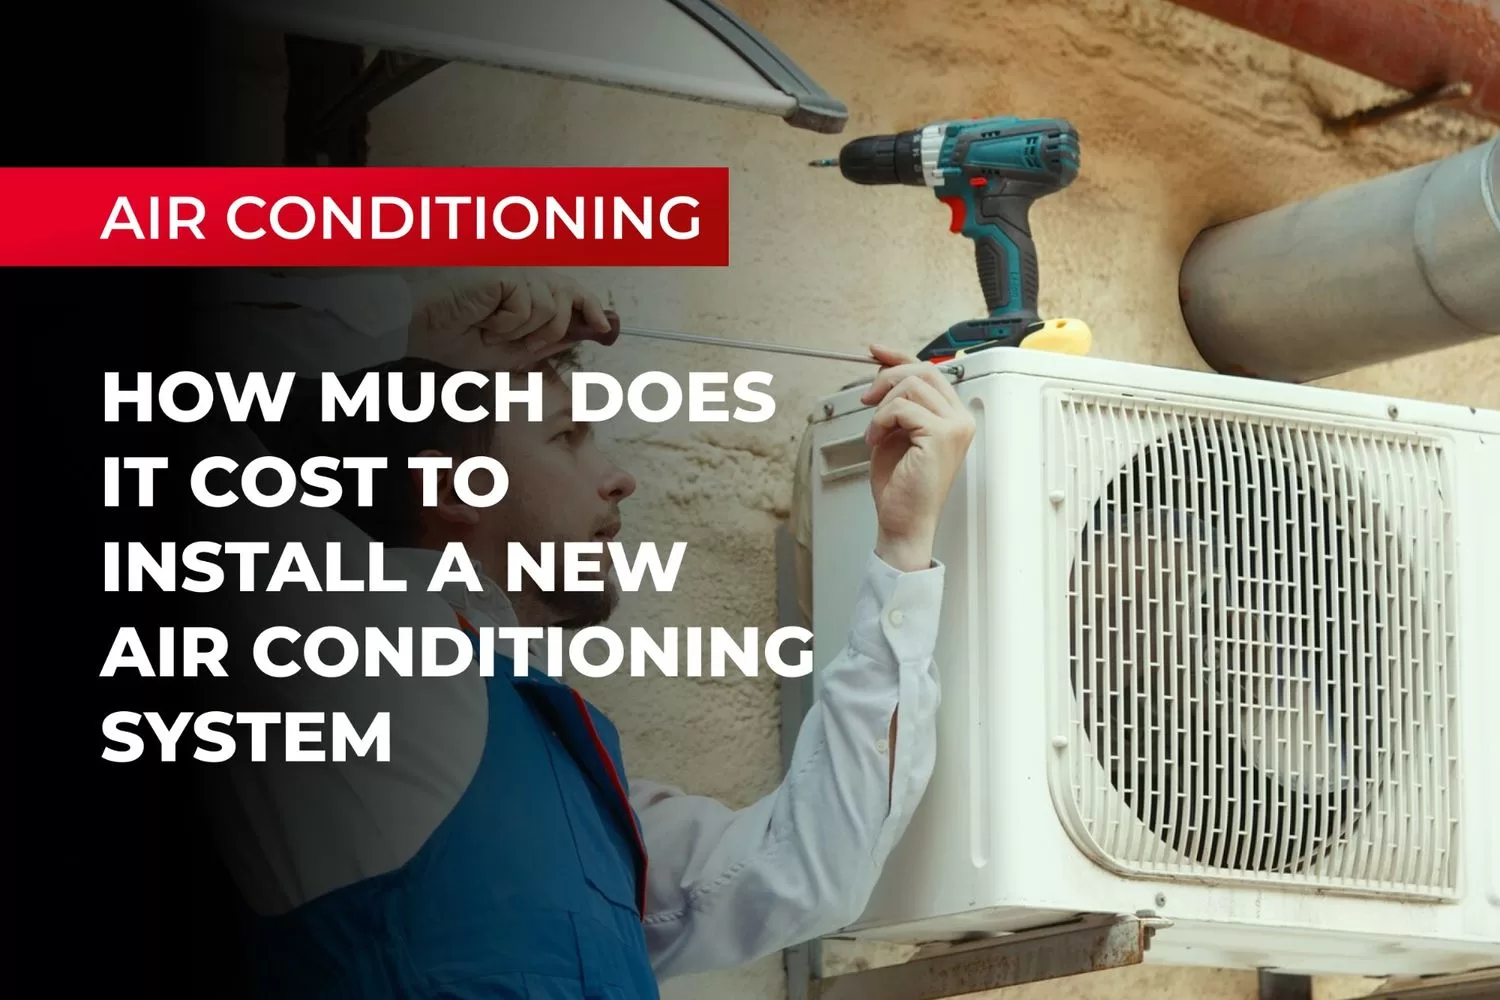 How much does it cost to install a new air conditioning system?